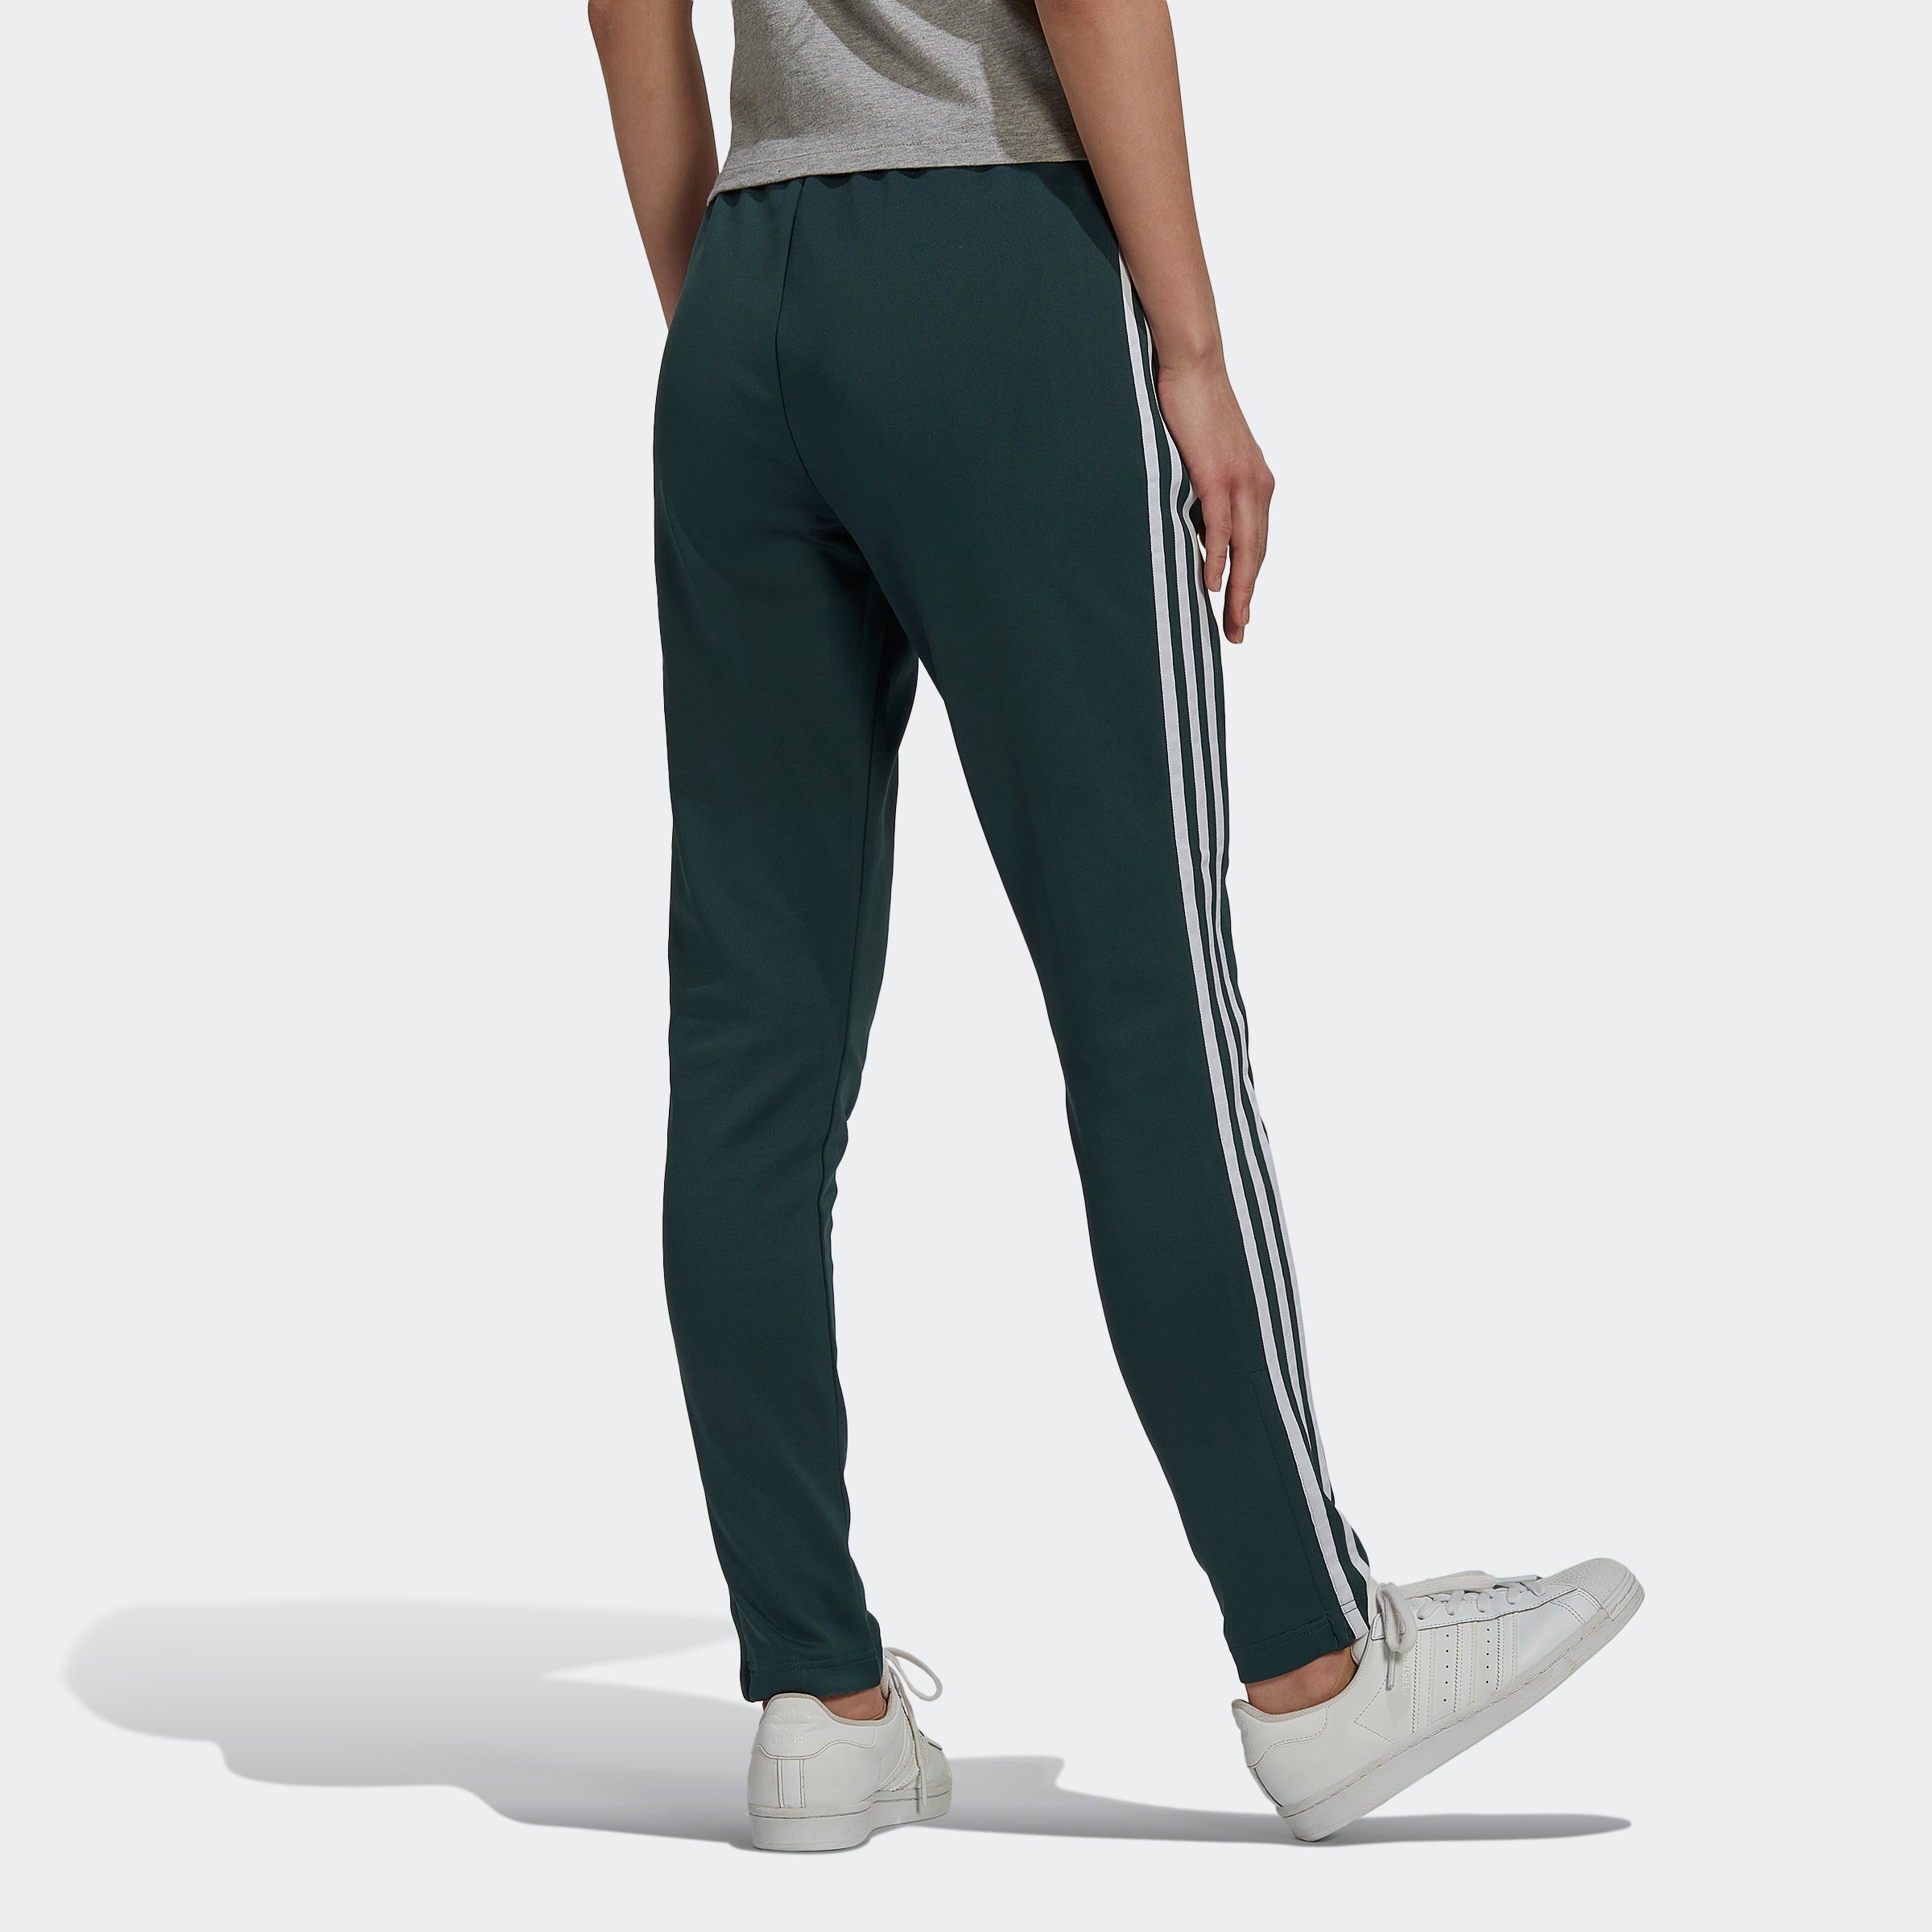 SST Women\'s Green Mineral | Track Pants Chicago adidas Sports City